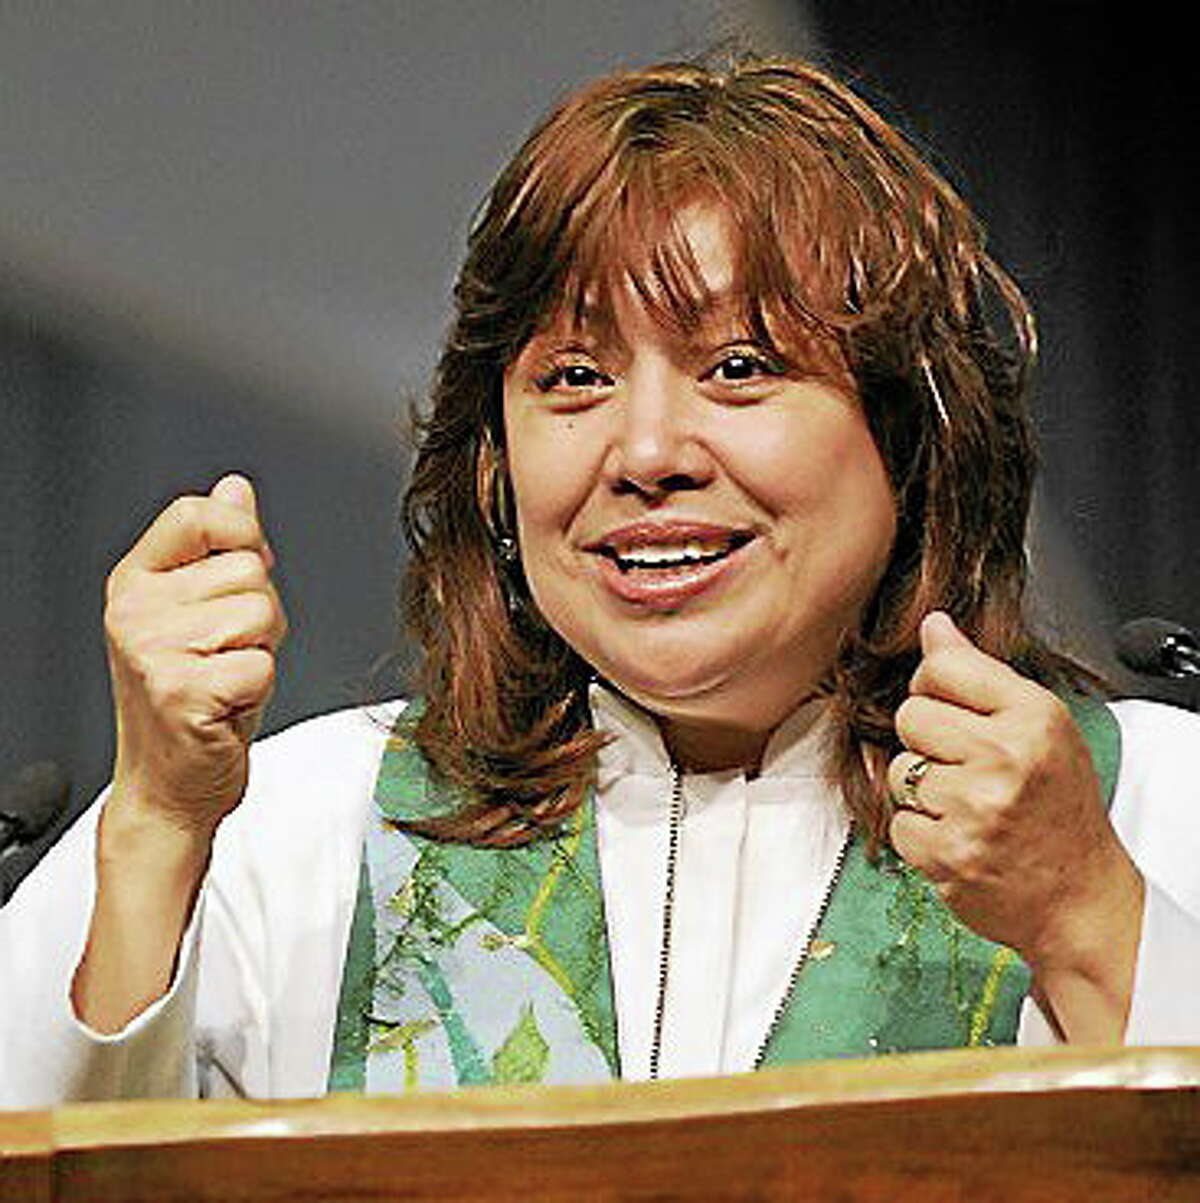 Minerva Garza Carcano is the first Hispanic woman to be elected to the episcopacy of The United Methodist Church.